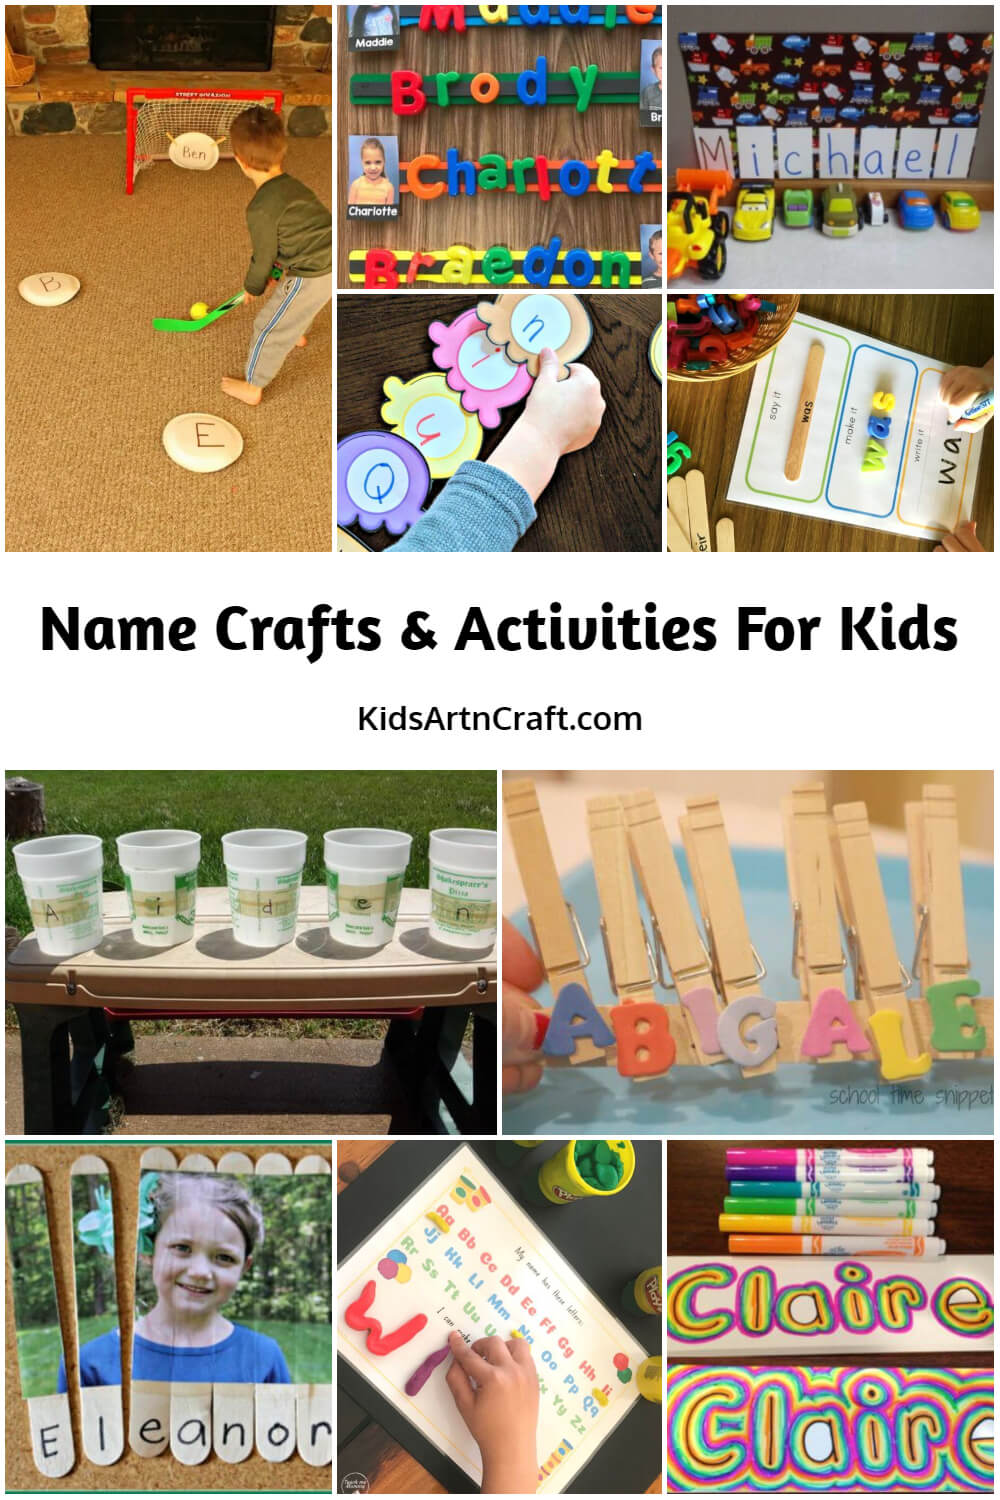 Name Crafts and Activities for Kids